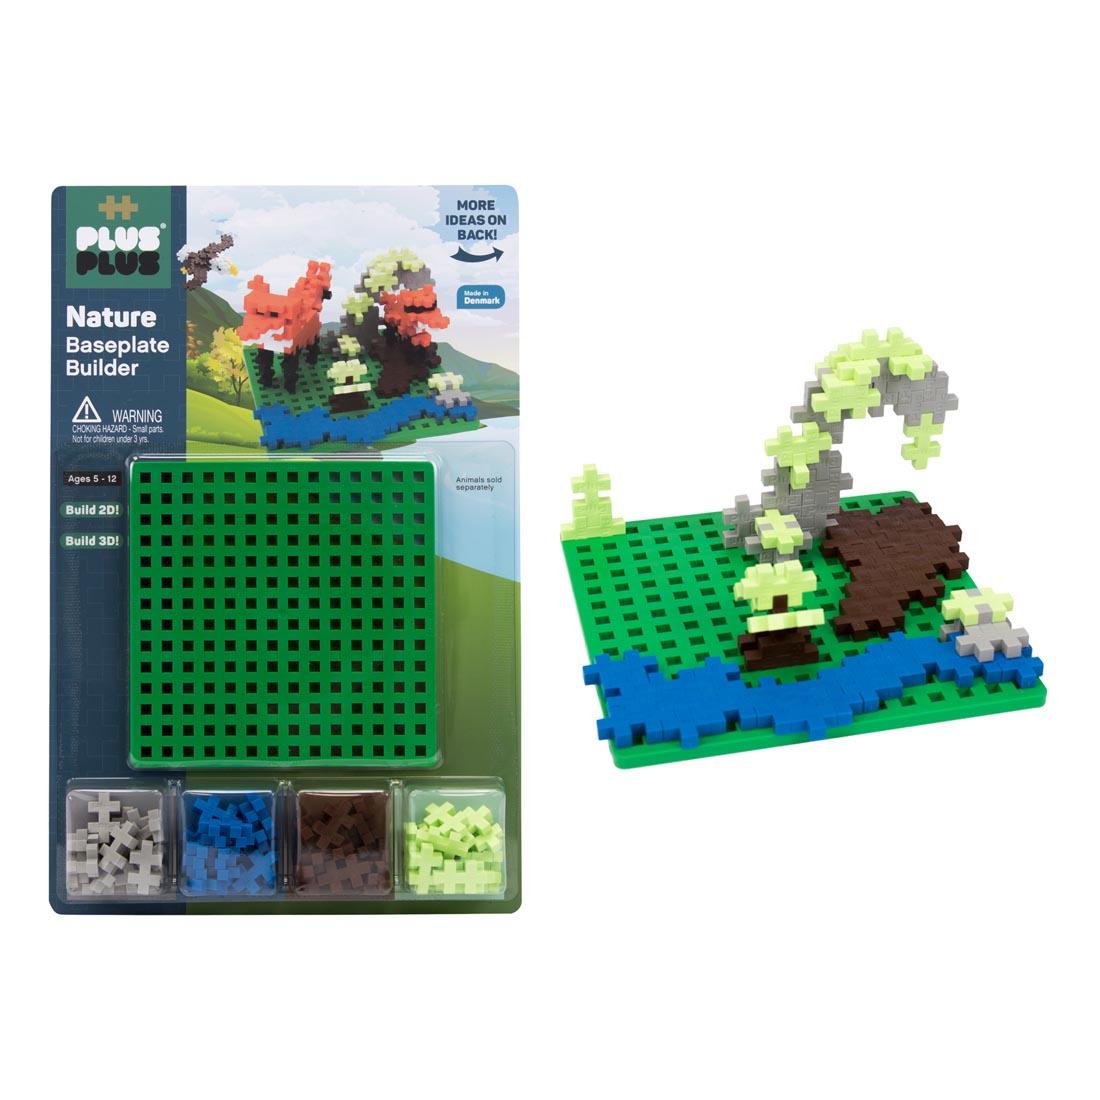 Plus-Plus Nature Baseplate Builder beside a sample creation